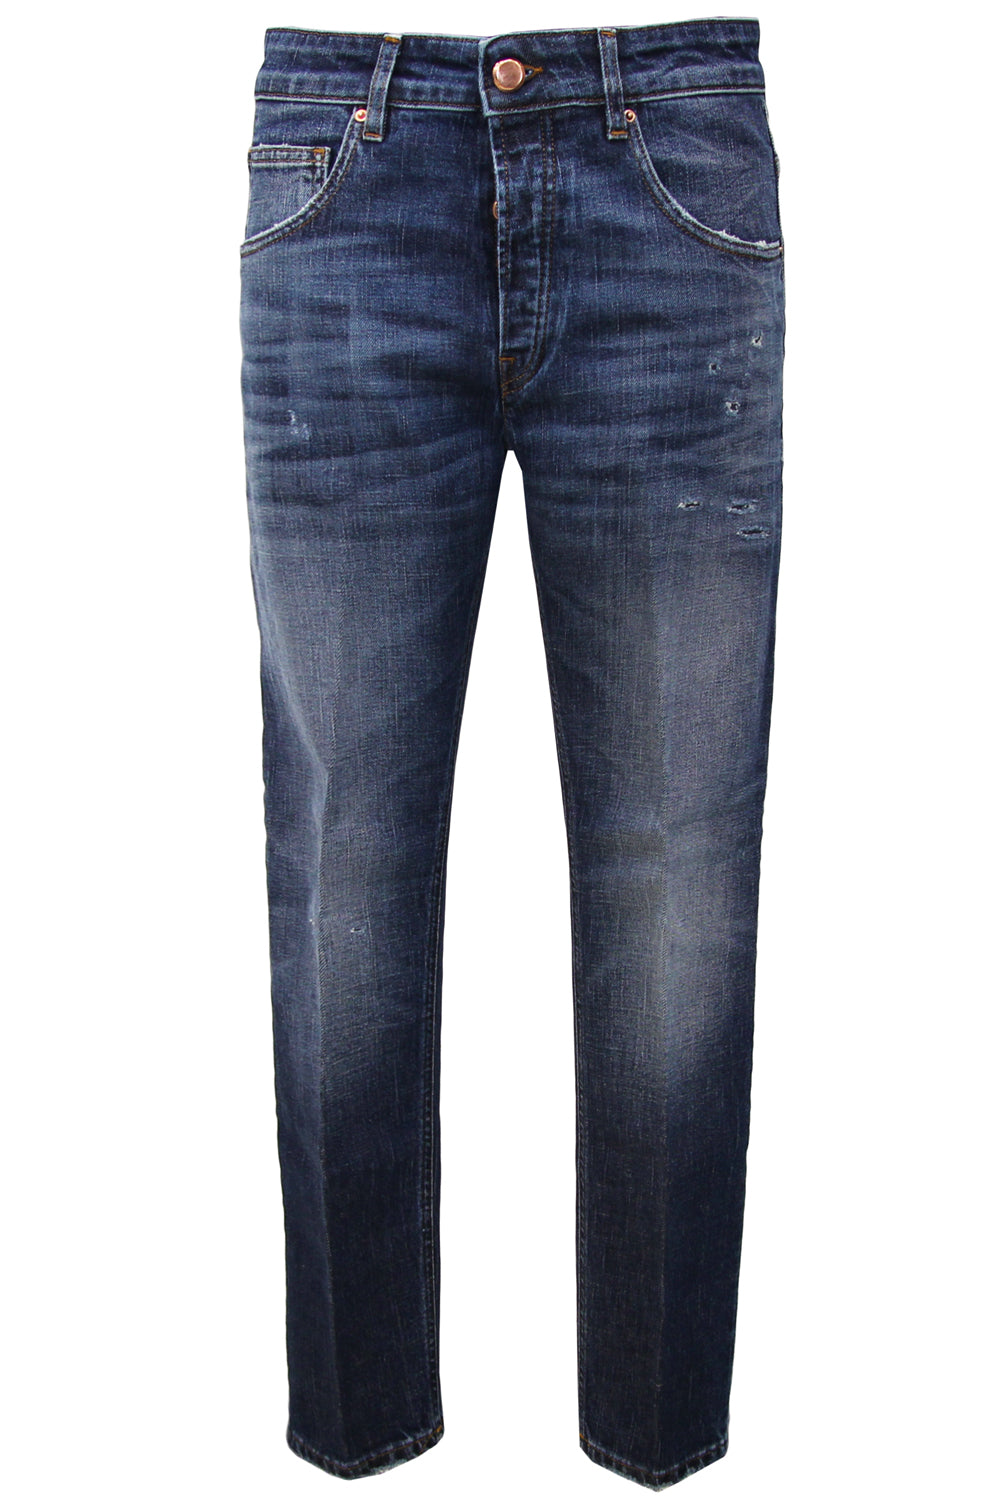 DON THE FULLER Jeans Yaren product